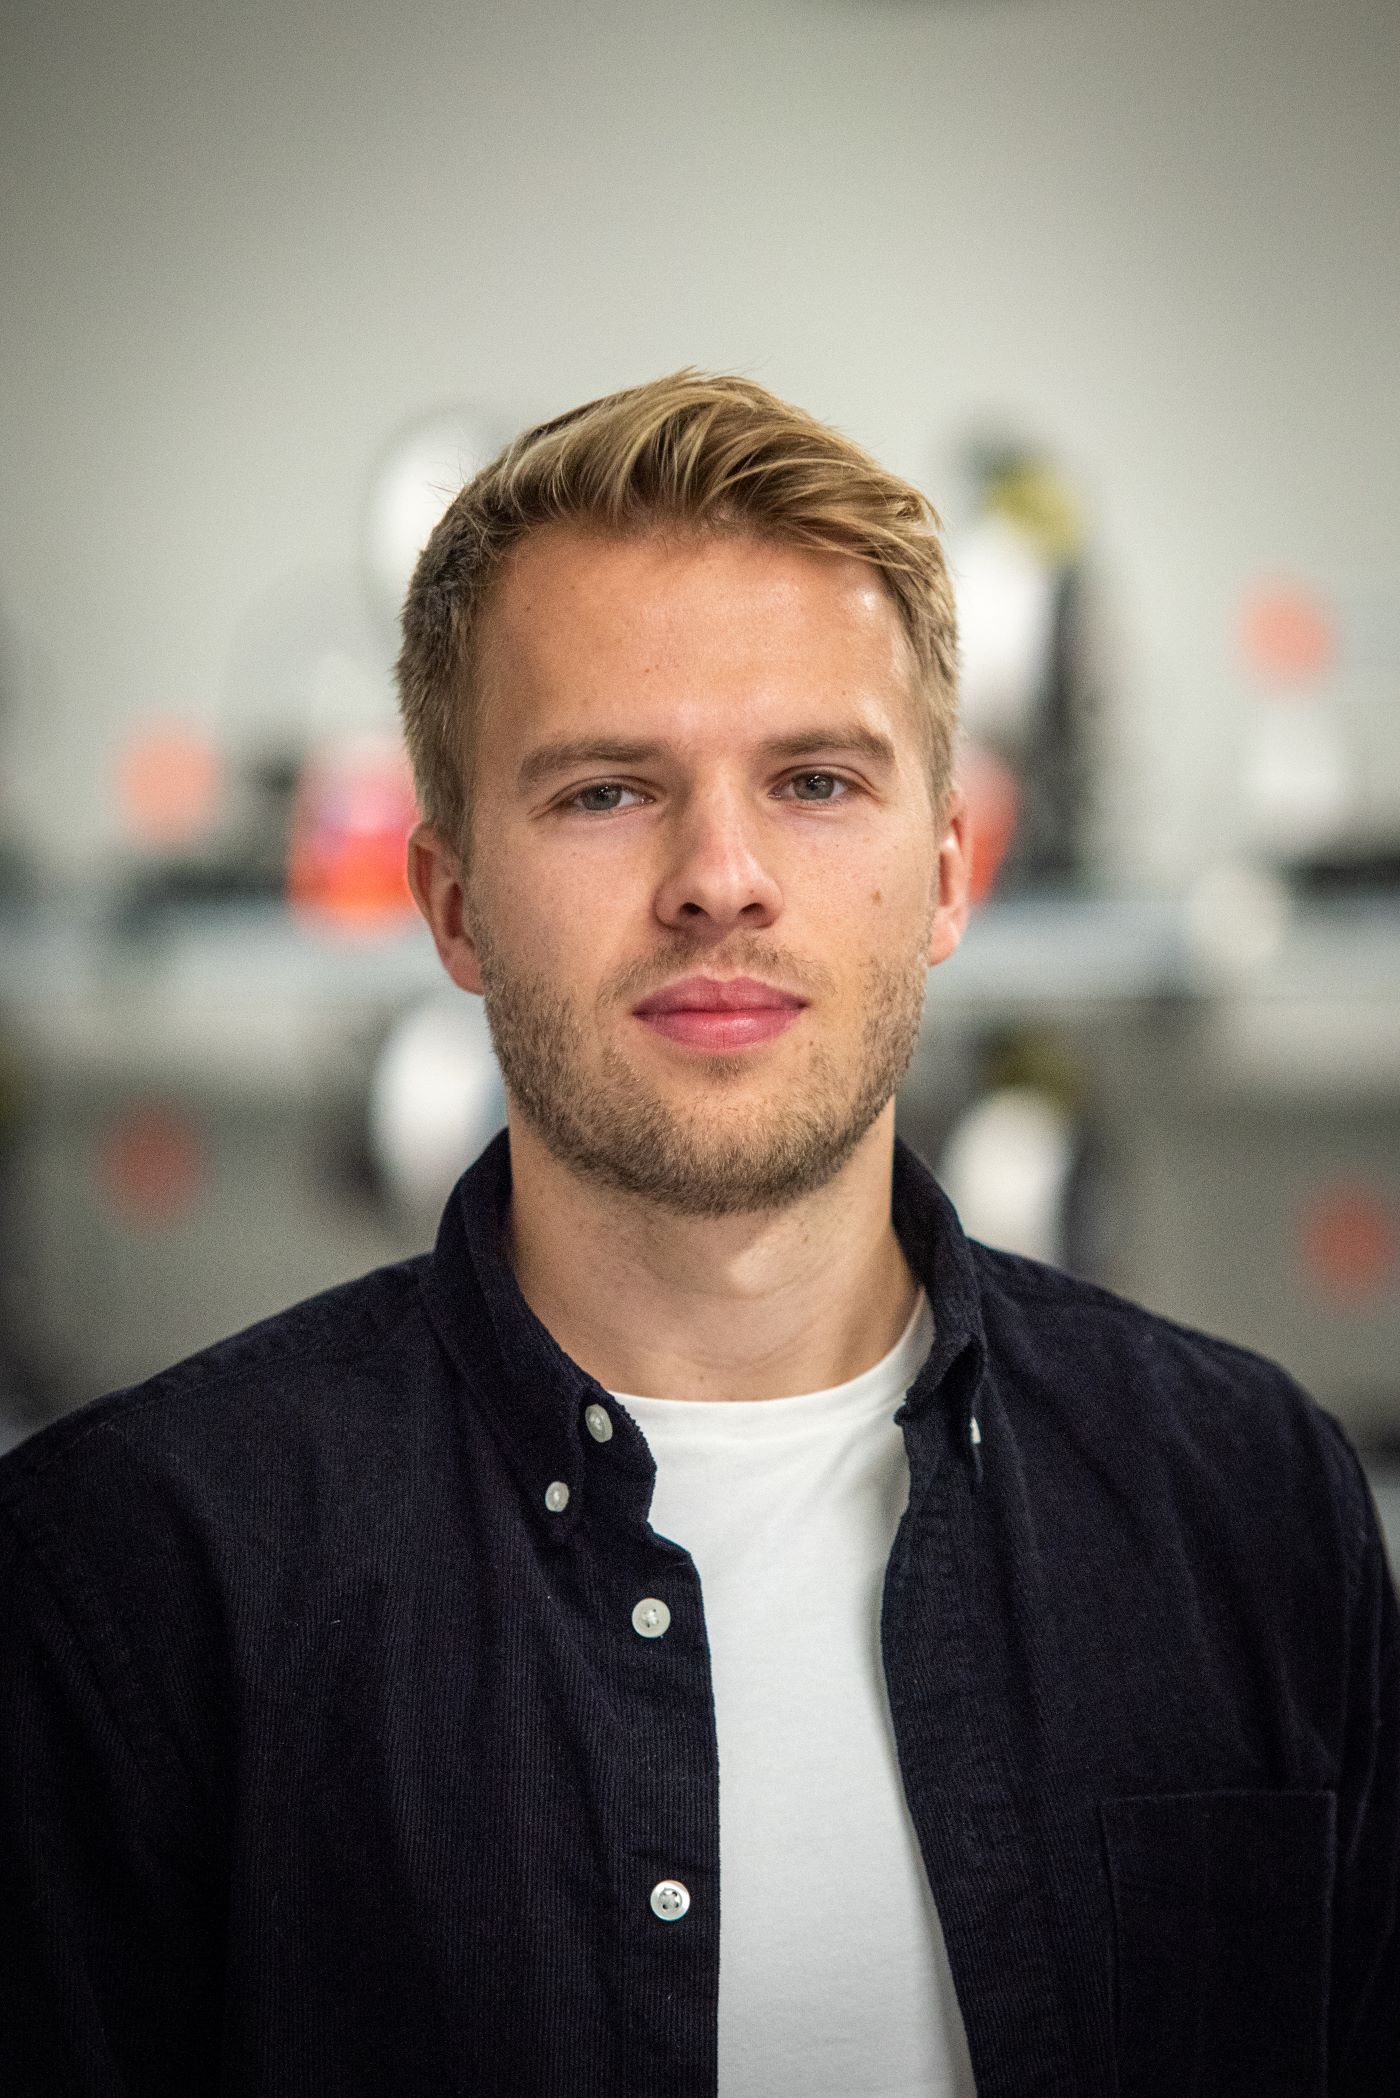 Robin Herbertsson, Master of Science in Engineering student at JTH.